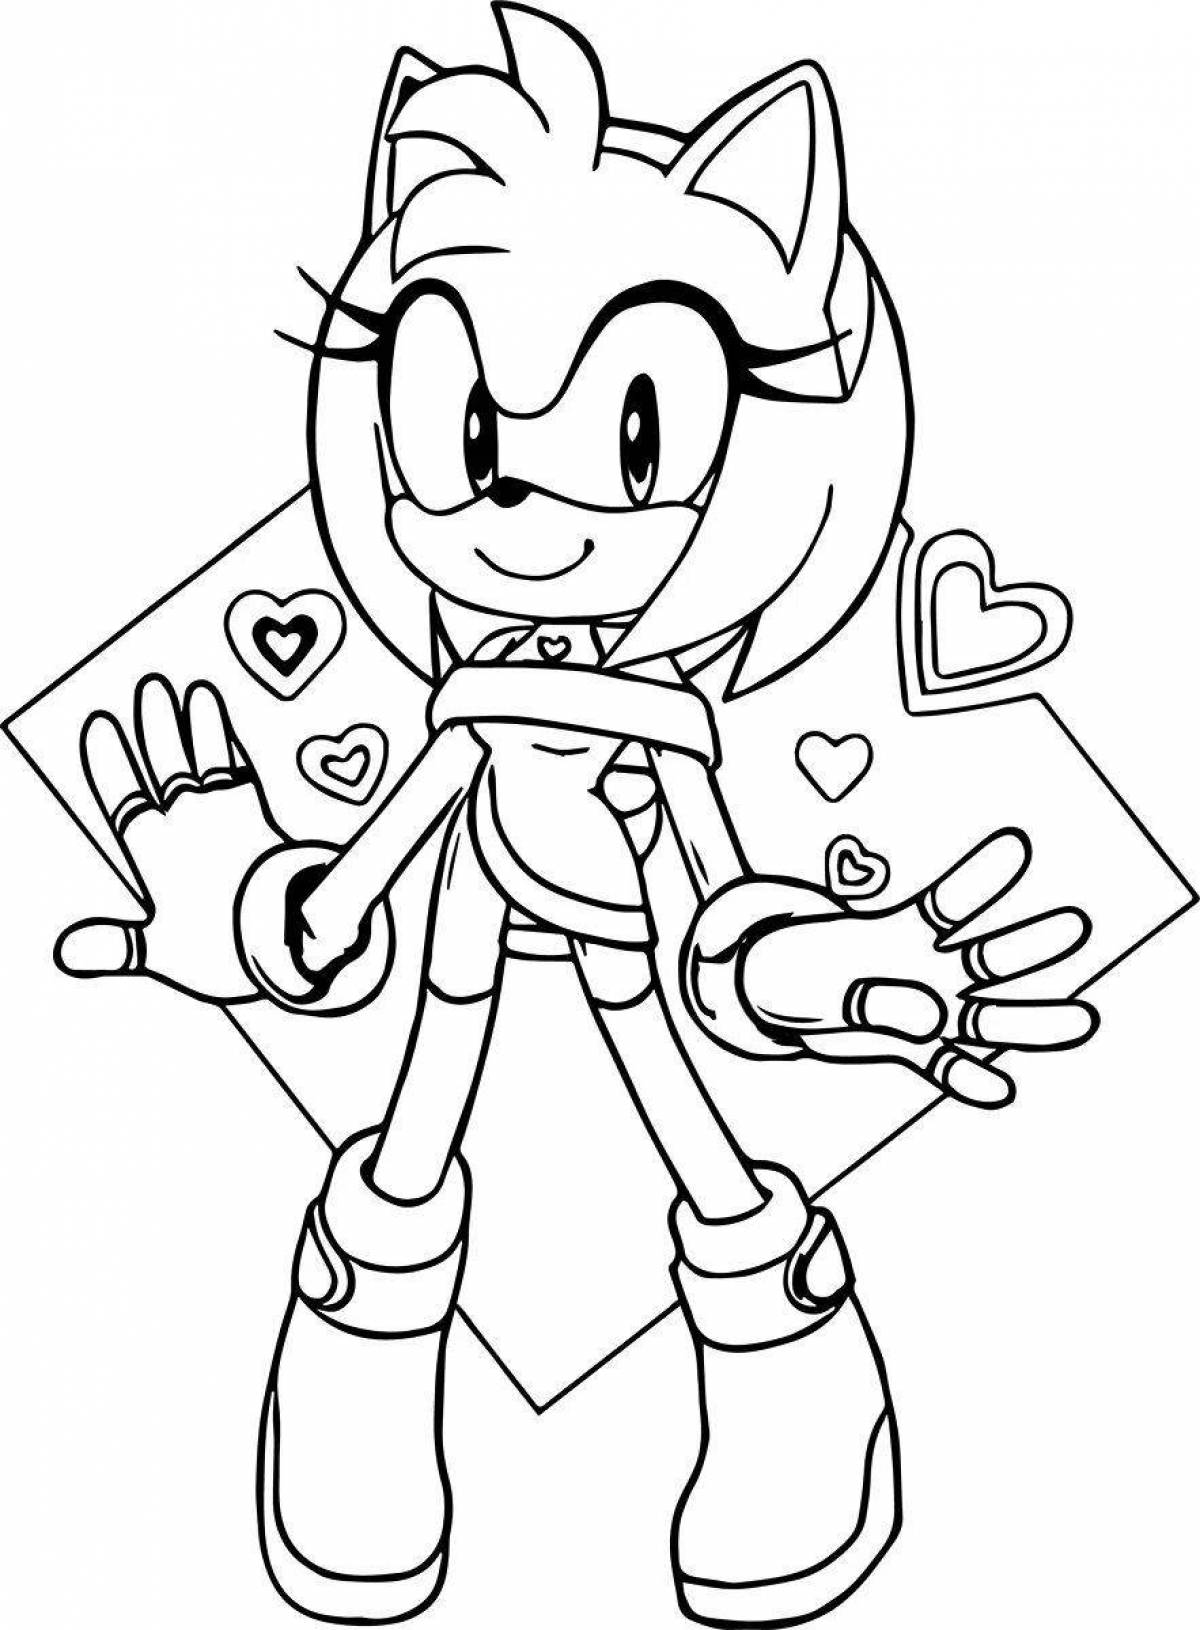 Fun all sonic characters coloring page